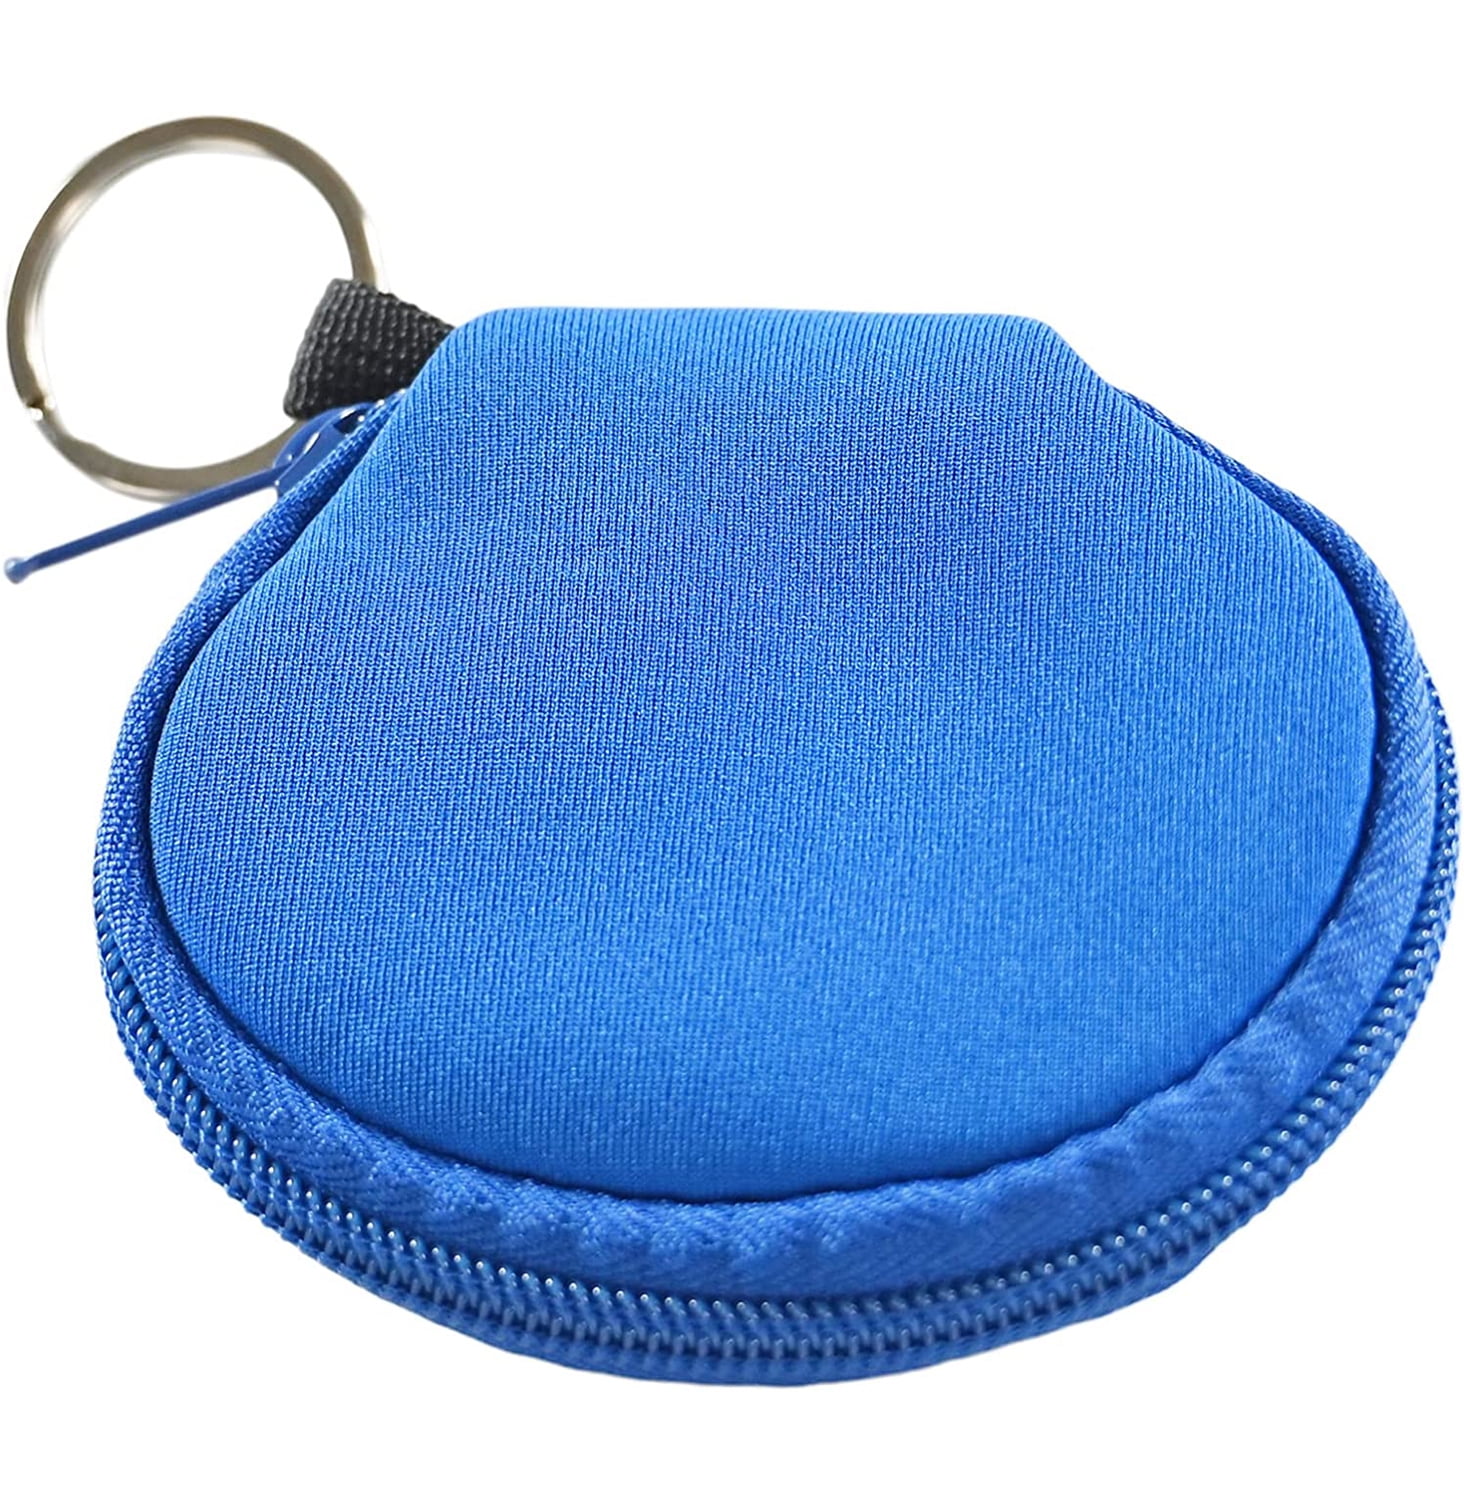 Blue Yellow - Flowfold Mini Zipper Pouch Waterproof Small Zippered Pouches  for Keys, Cards & AirPods Case Blue price in Saudi Arabia